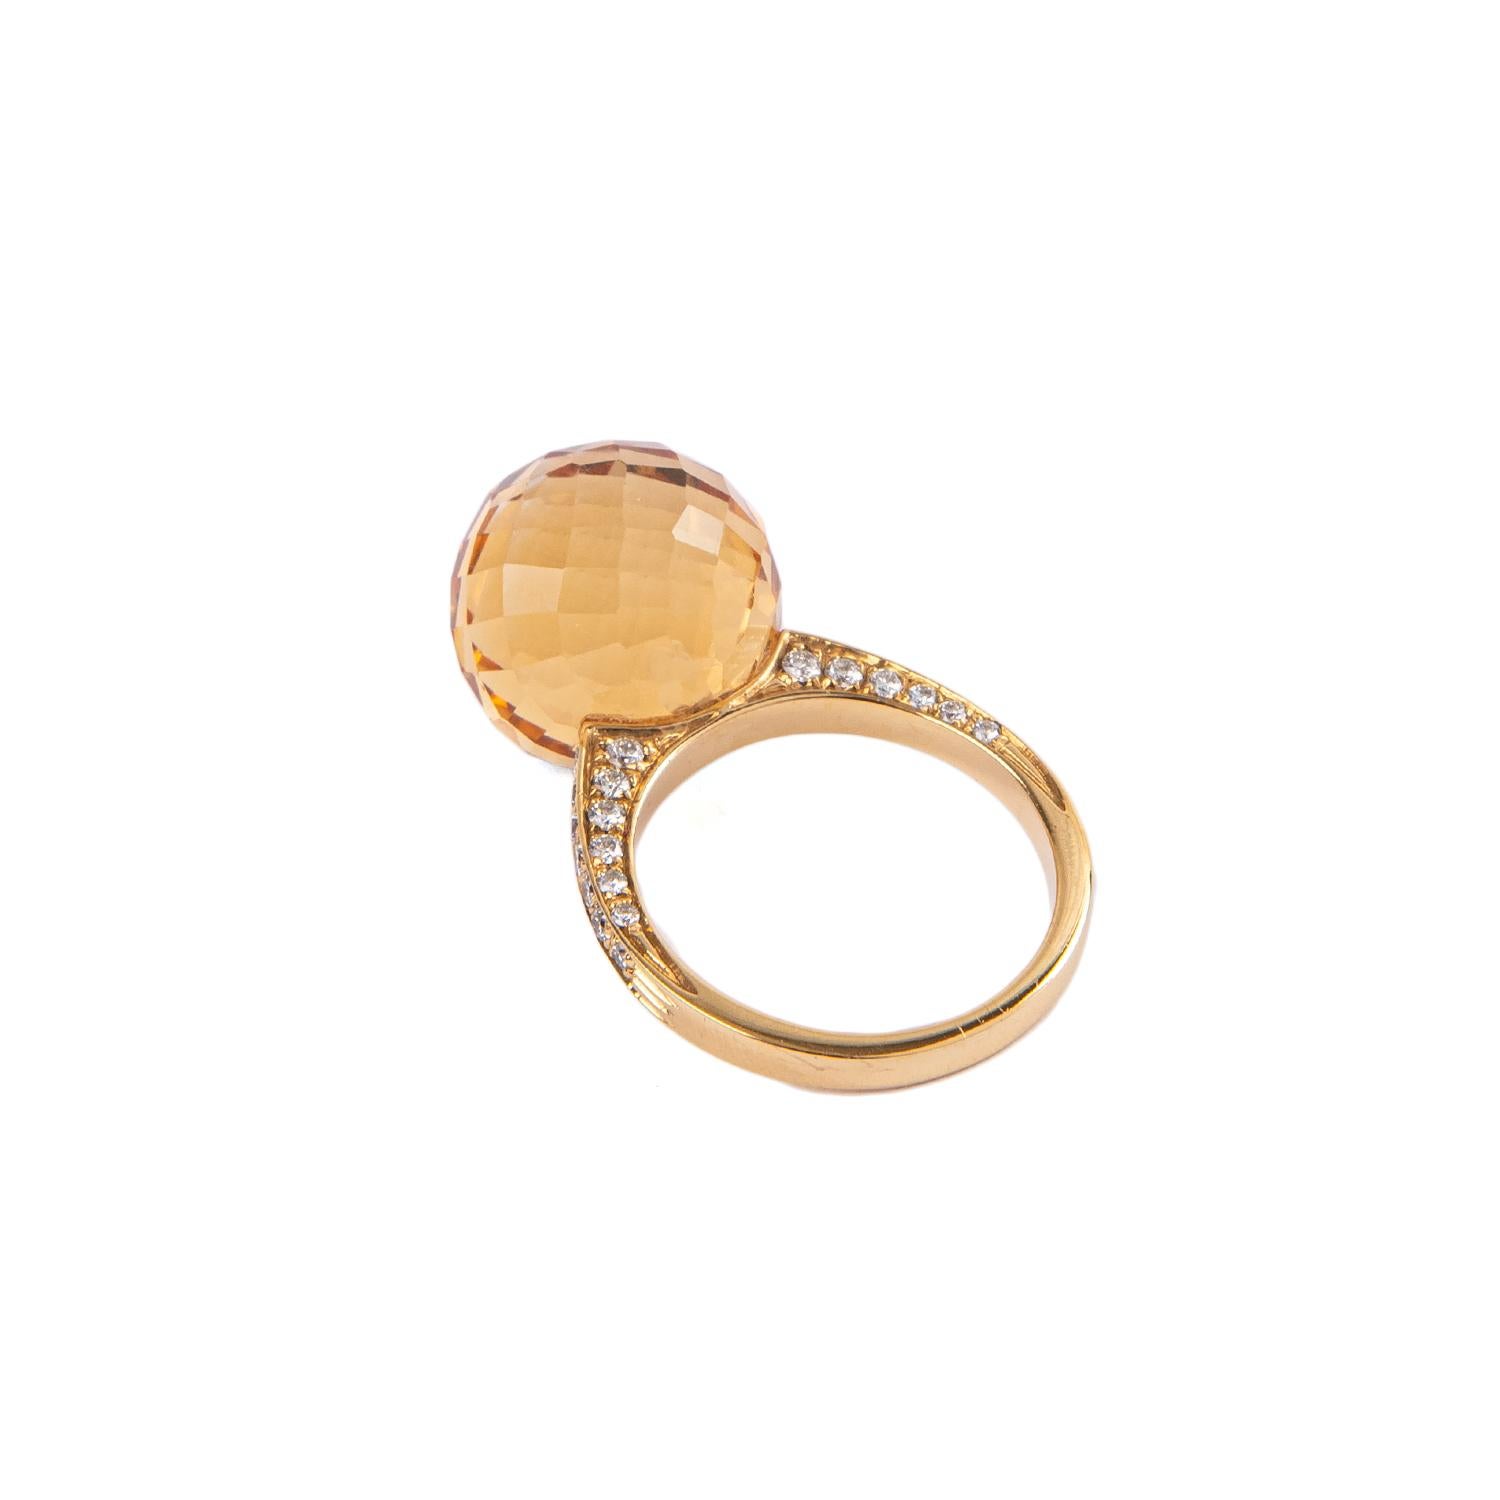 Carlo Luca della Quercia Beautiful Cocktail Ring feautered with a ball shape 17.67 ct. quartz and 0,46ct diamonds, perfect for any occasion night and day